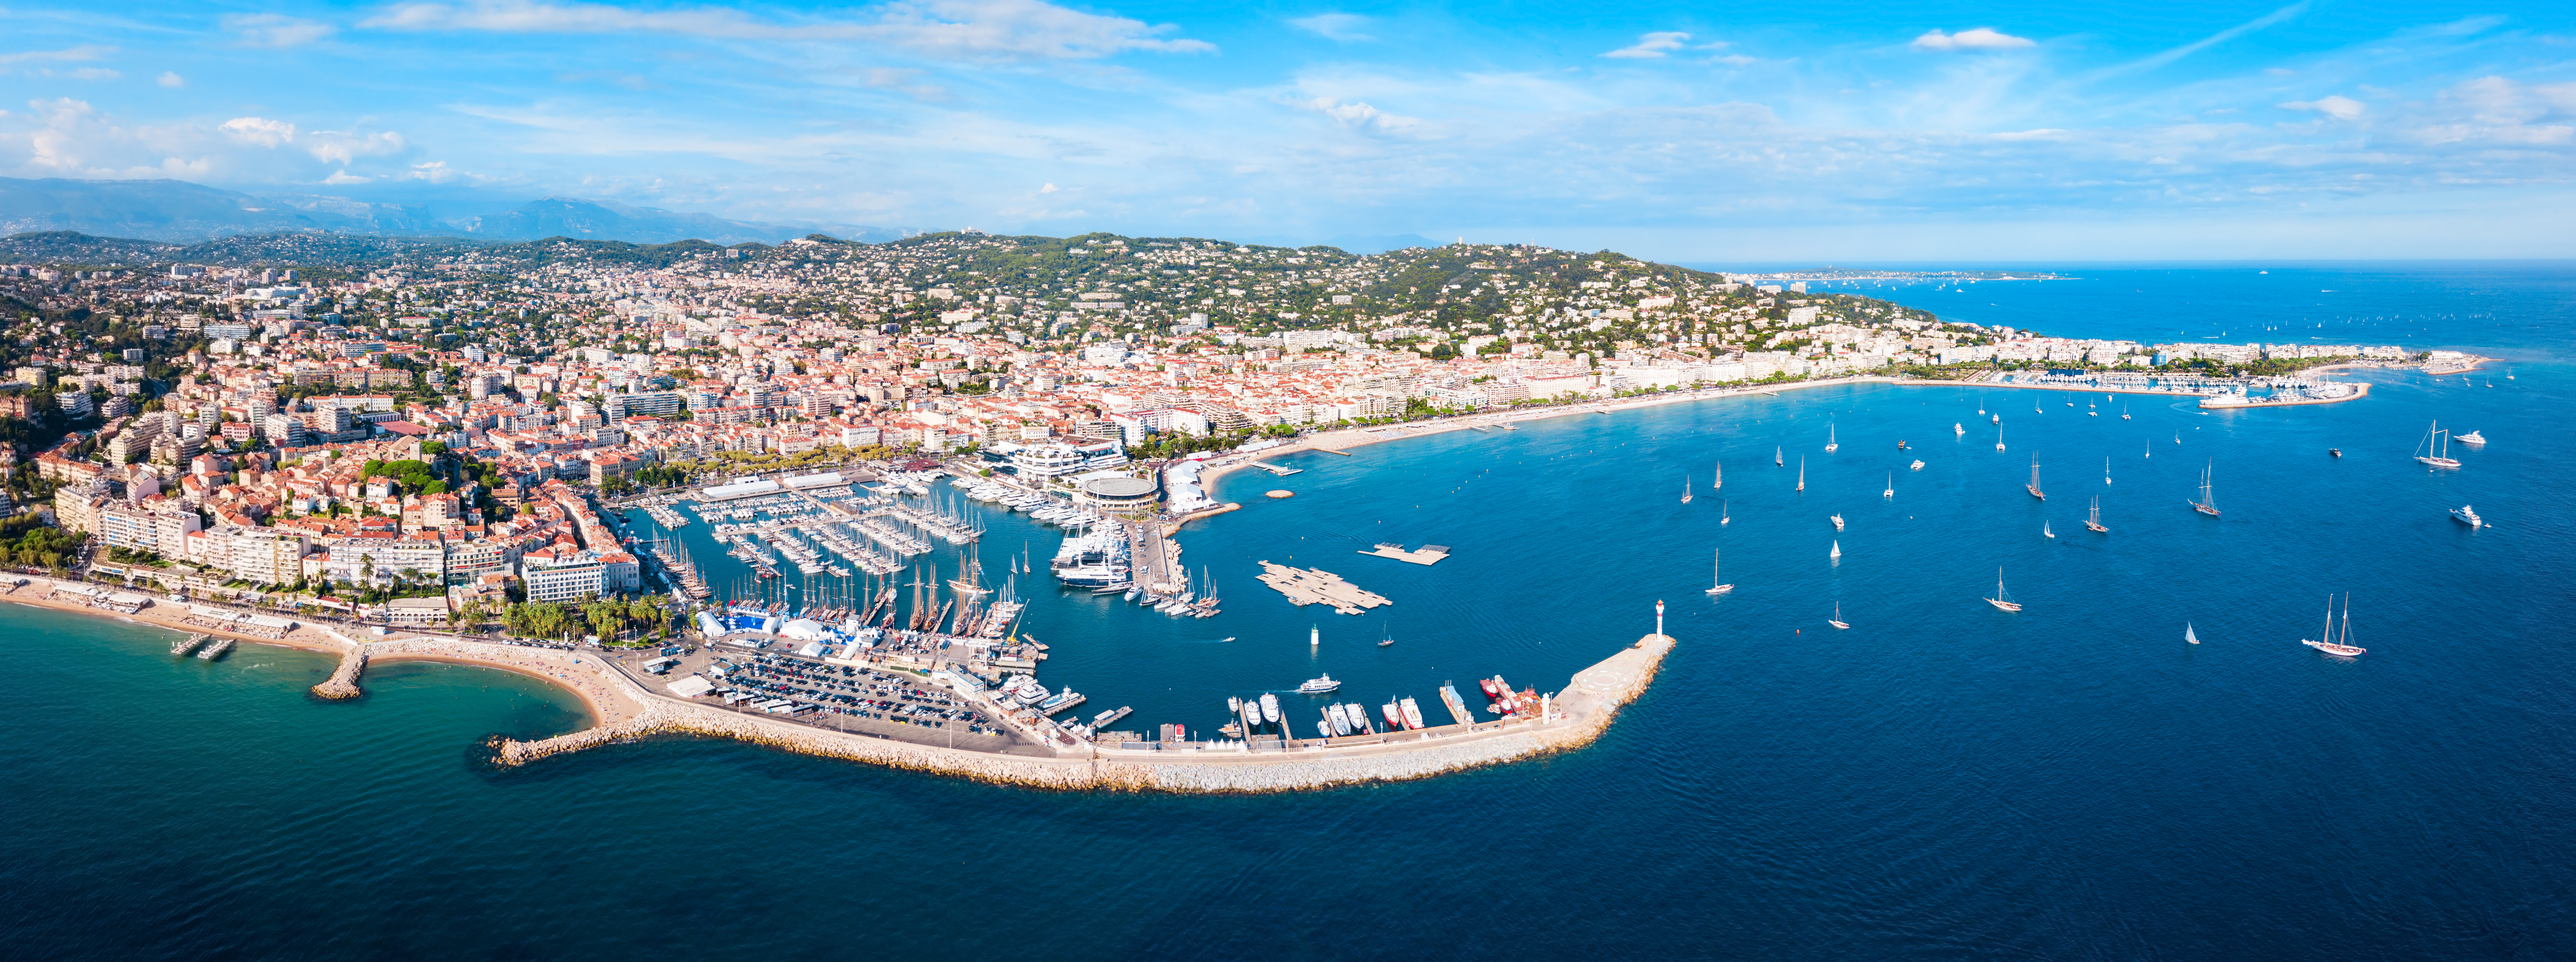 Cannes Accommodations Buy your property with Cannes Accommodation